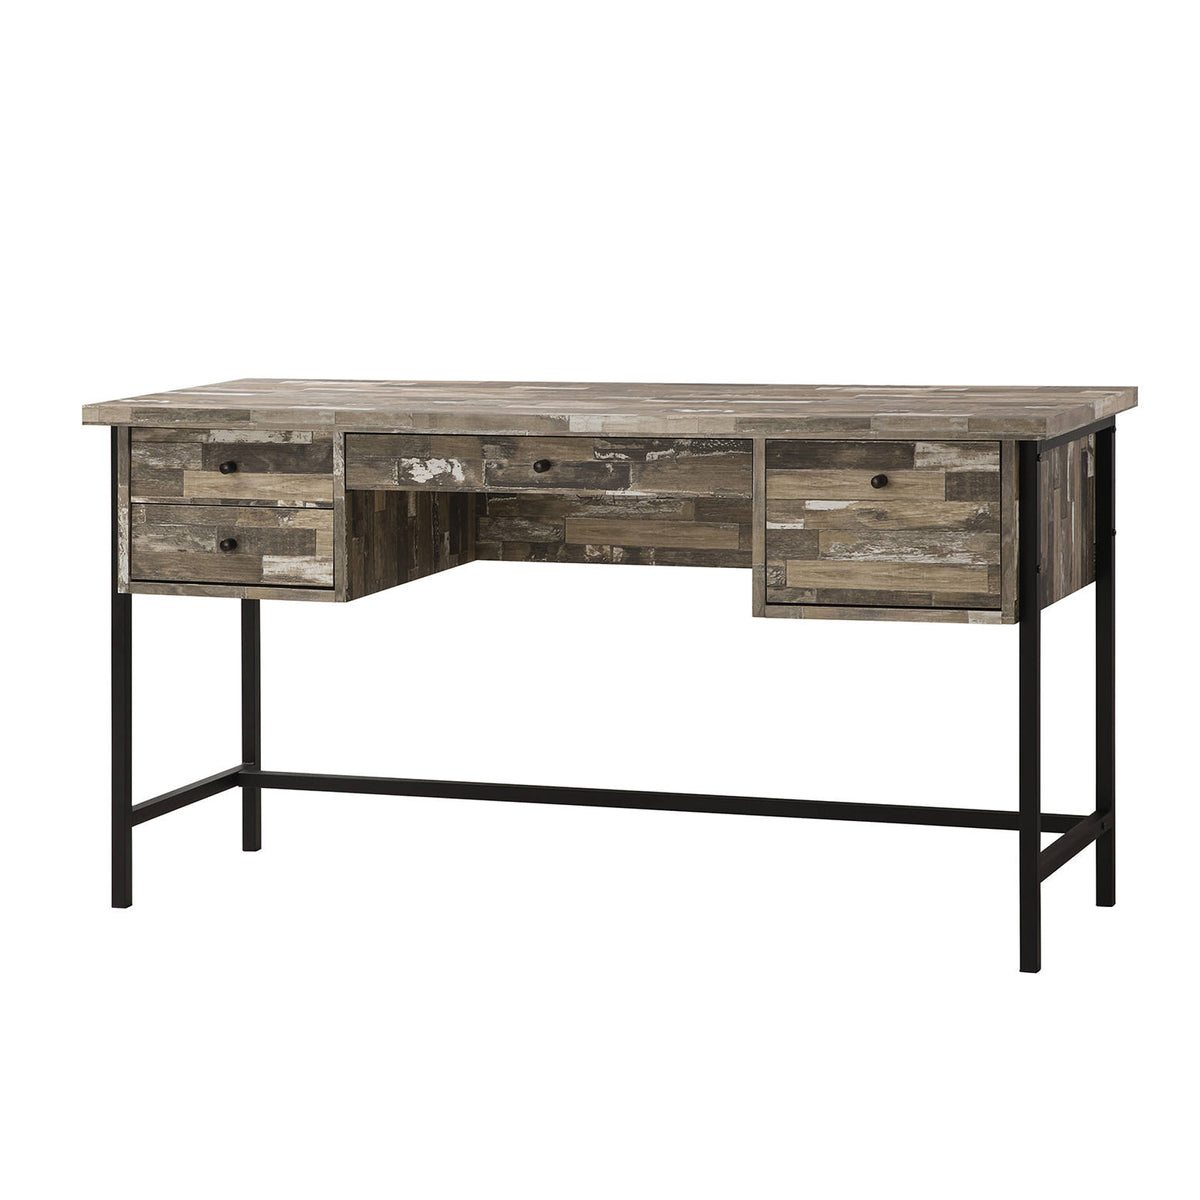 BM159133 Rustic Style Wooden Writing Desk with Drawers